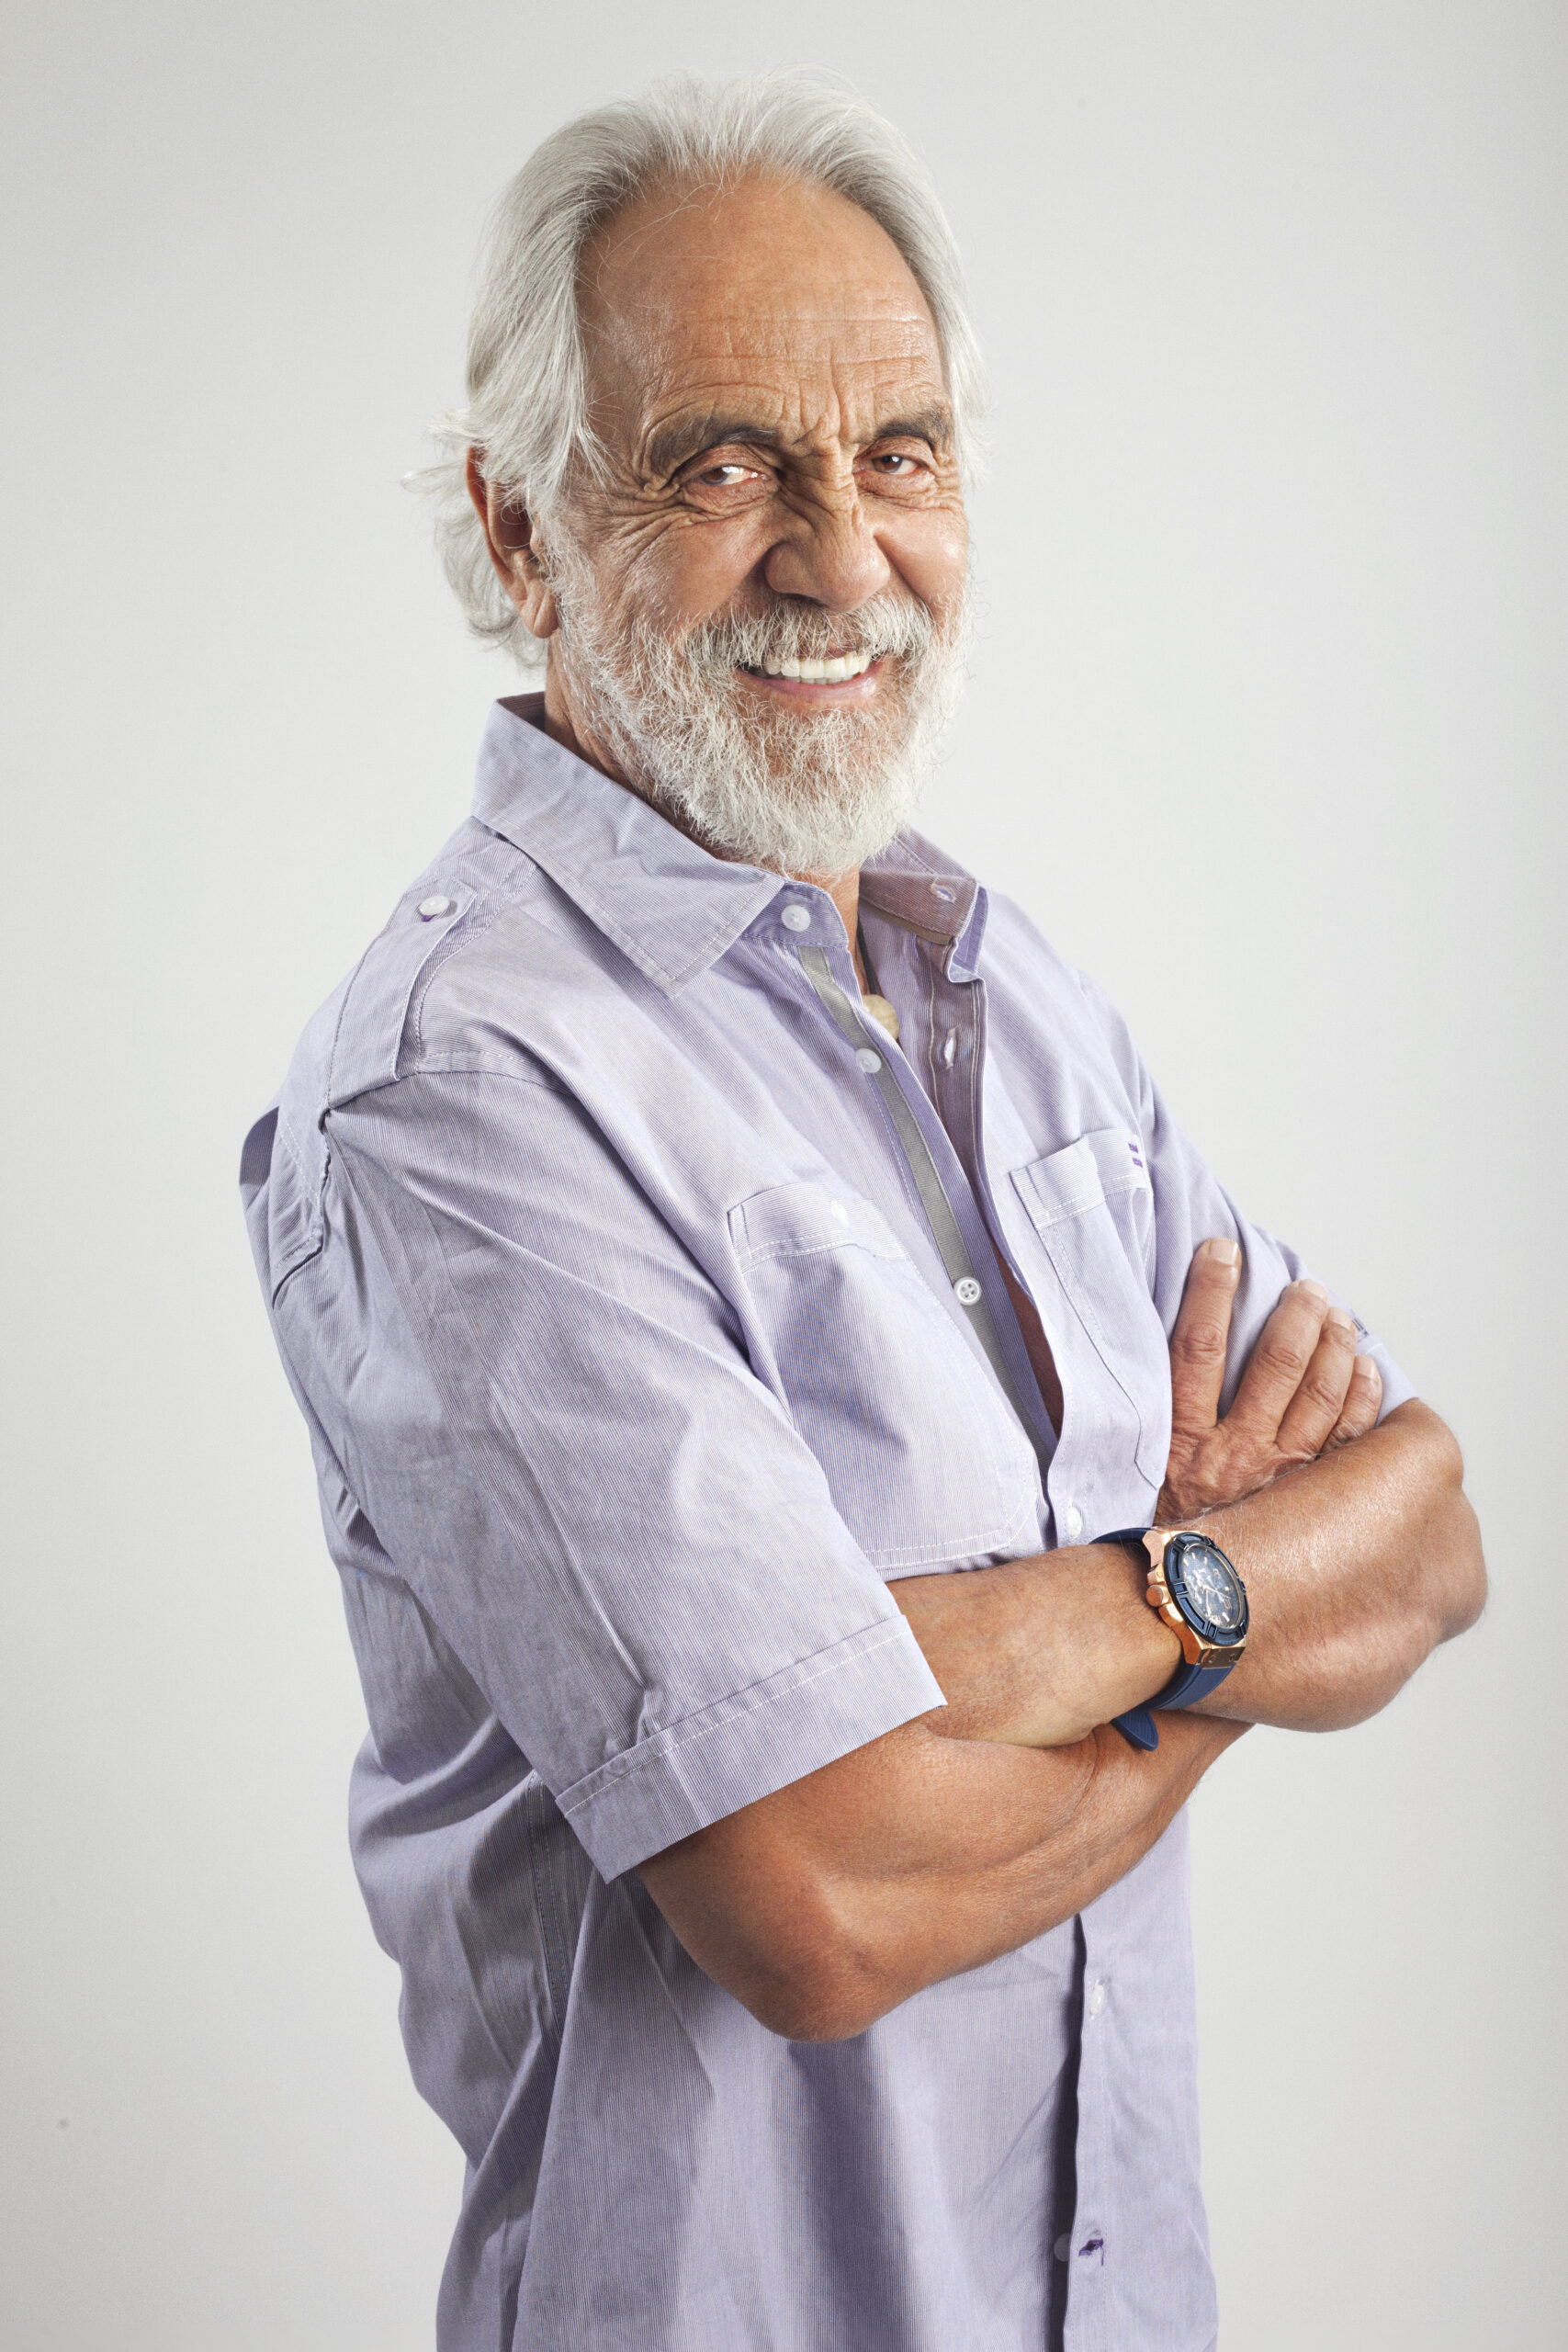 Tommy Chong promotional shot. Photo Credit: Neil Visel. Photo provided by: Matt Johnstone Publicity / Mammoth Lakes Film Festival